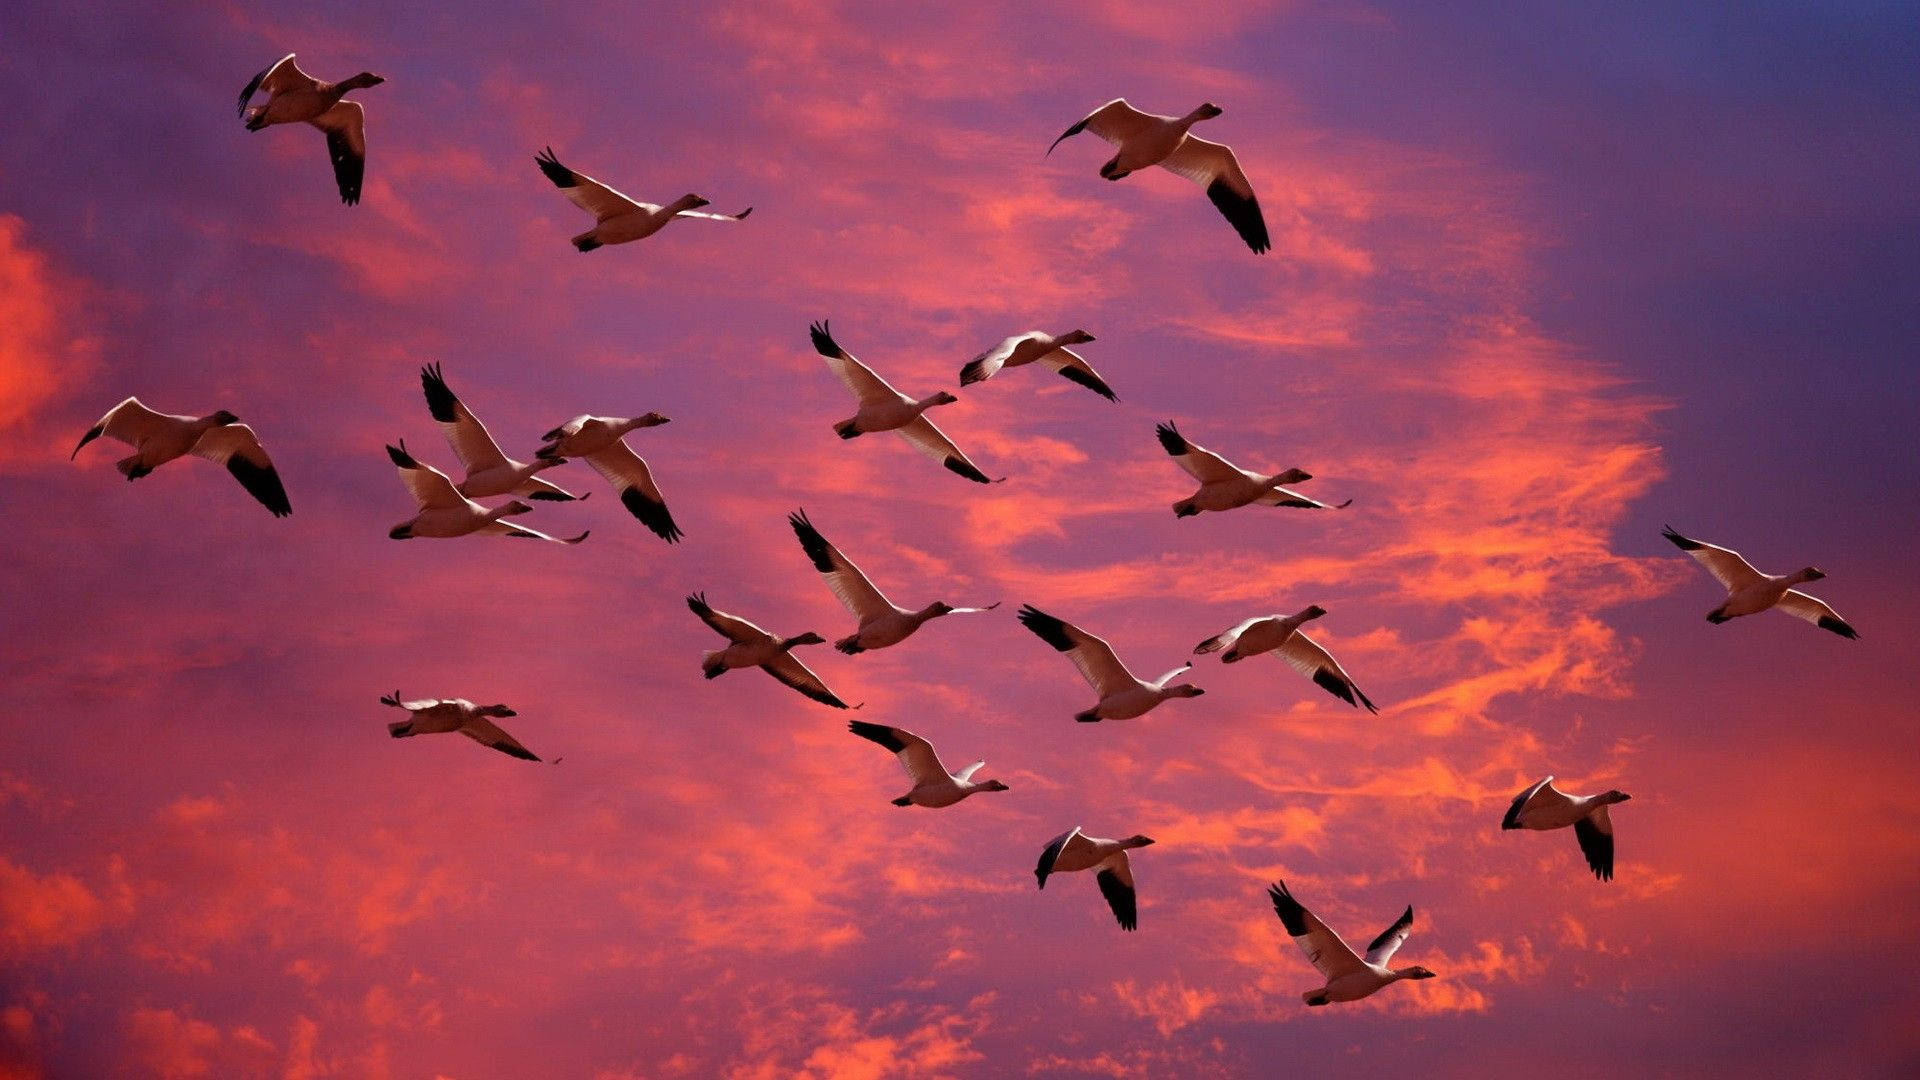 Geese Birds Flying Over The Purple-Pink Sky Wallpaper